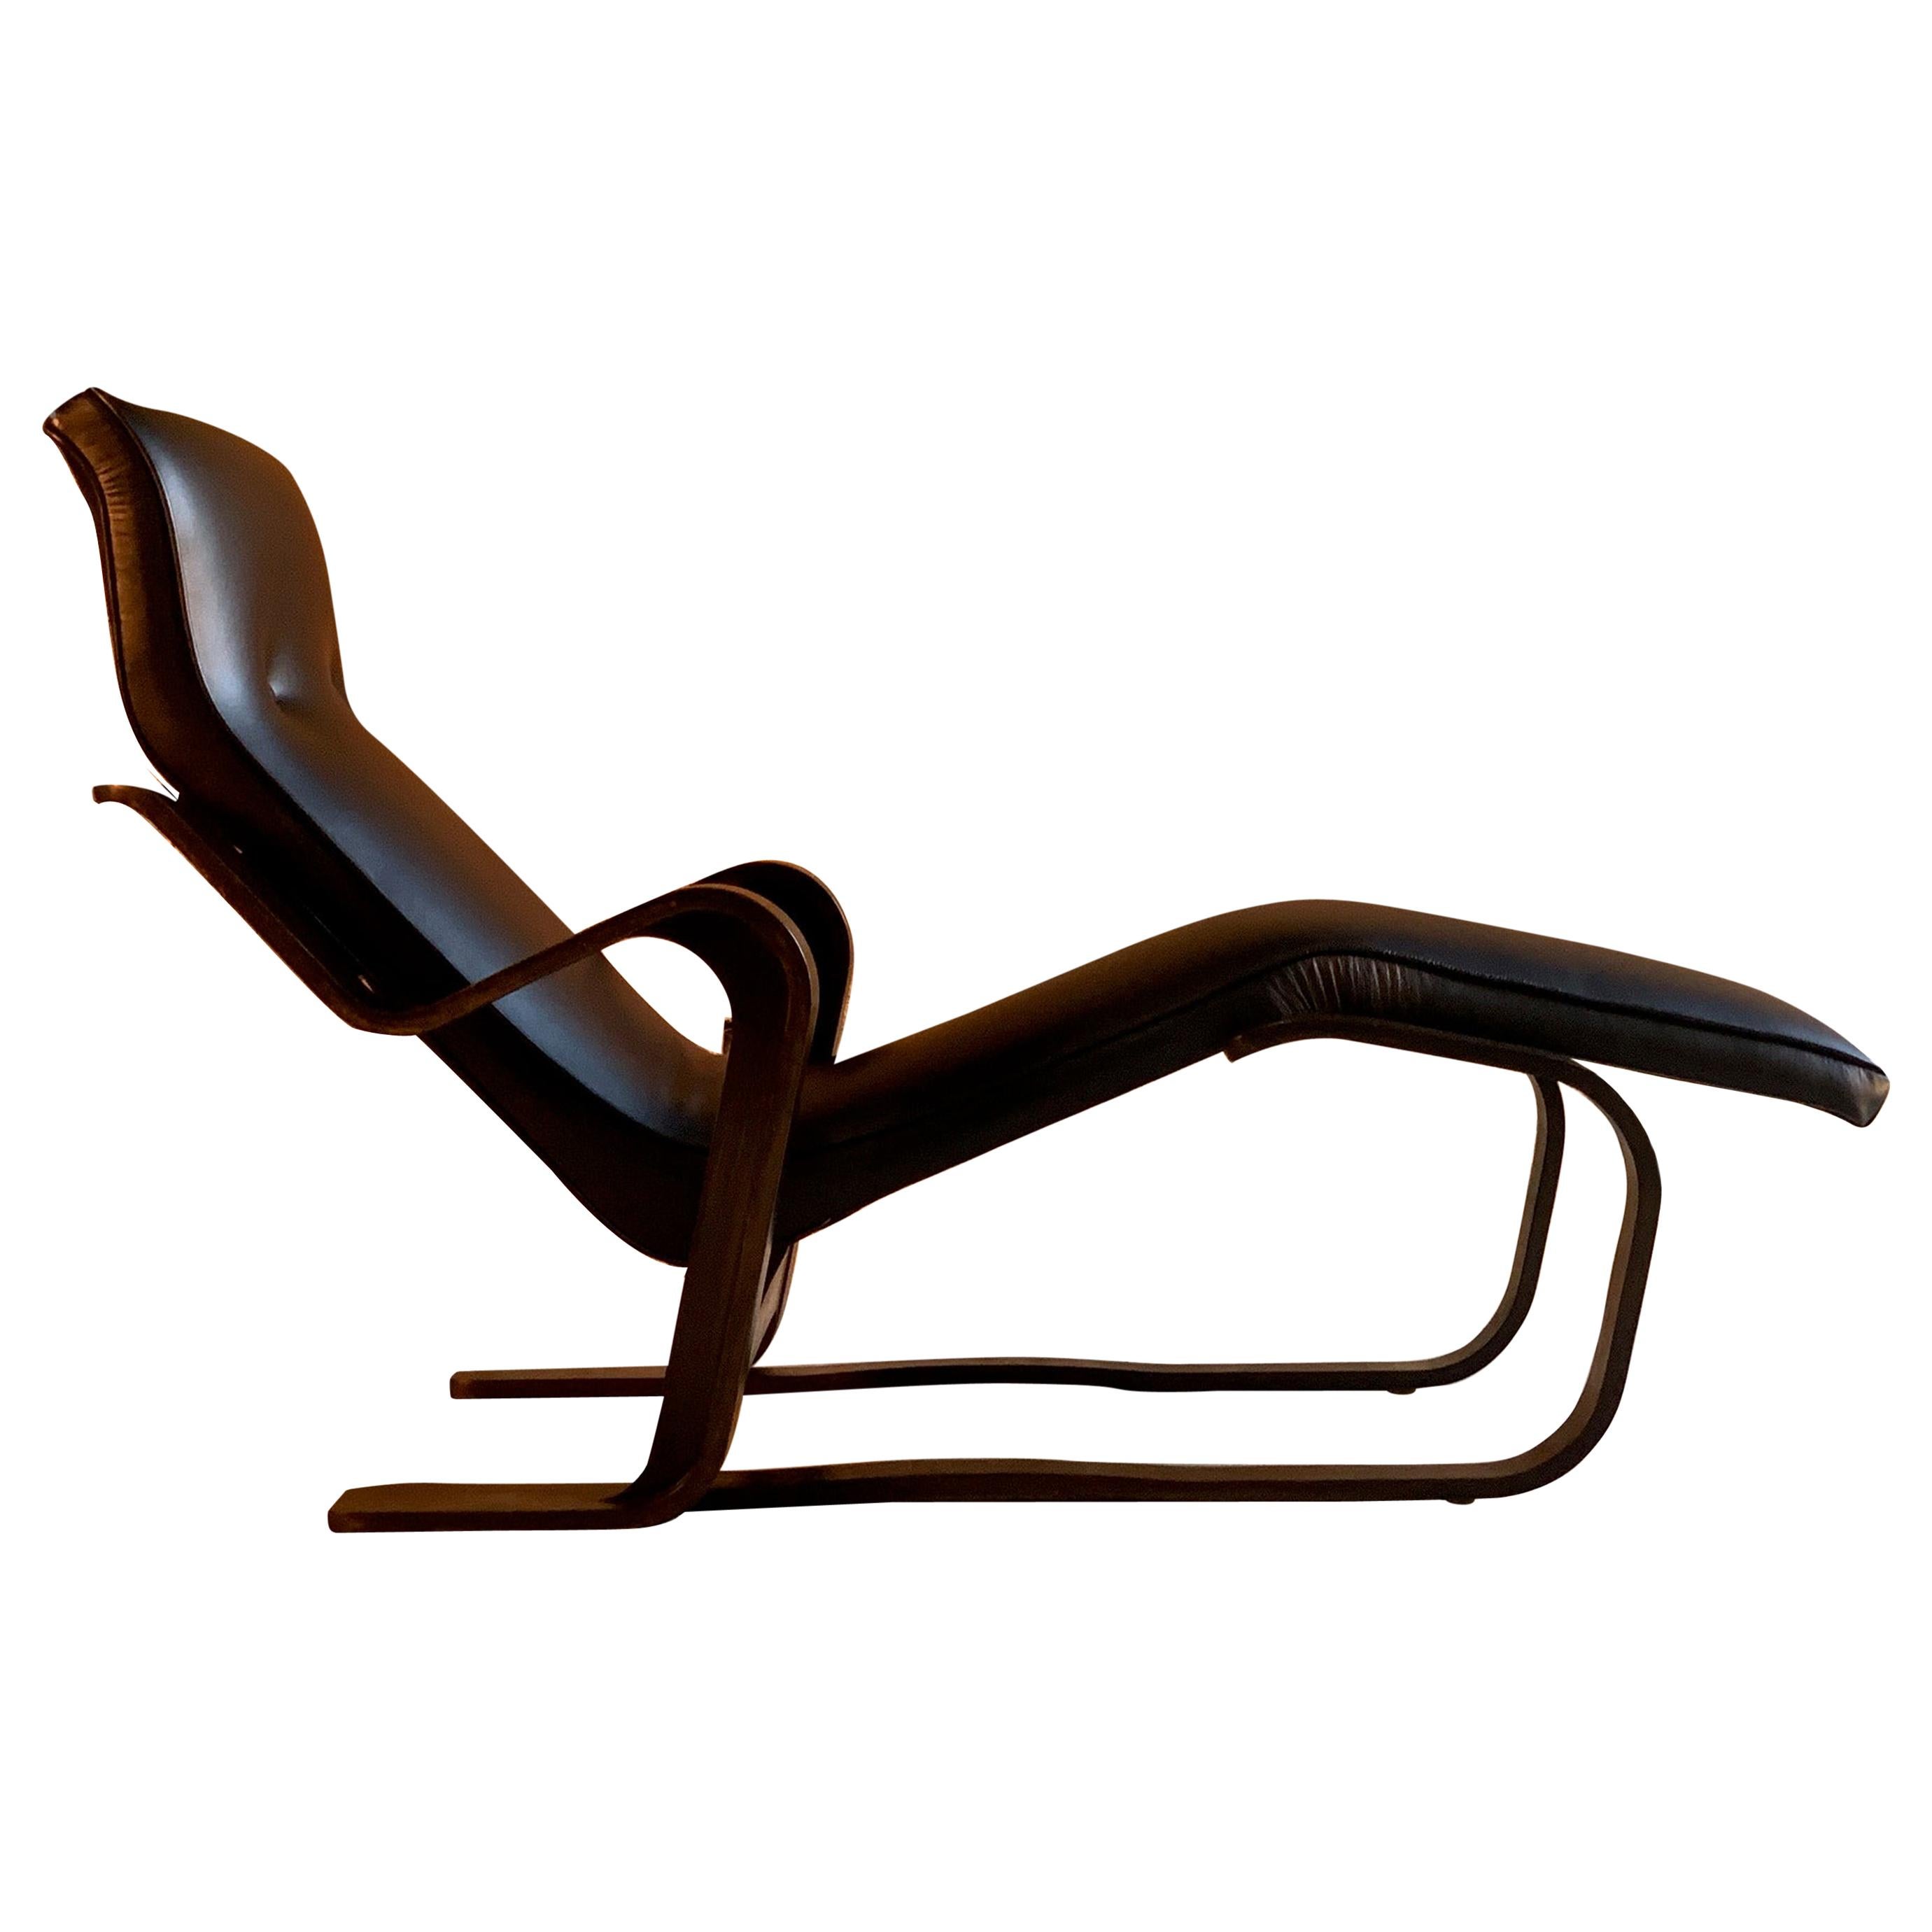 Marcel Breuer long chair chaise lounge attributed to Isokon, circa 1970 Bauhaus

Marcel Breuer 'Long Chair' ebonized bent ply with black leather seat pad by Isokon circa 1970s, the ‘Long chair’, with its bent frame of laminated birch wood